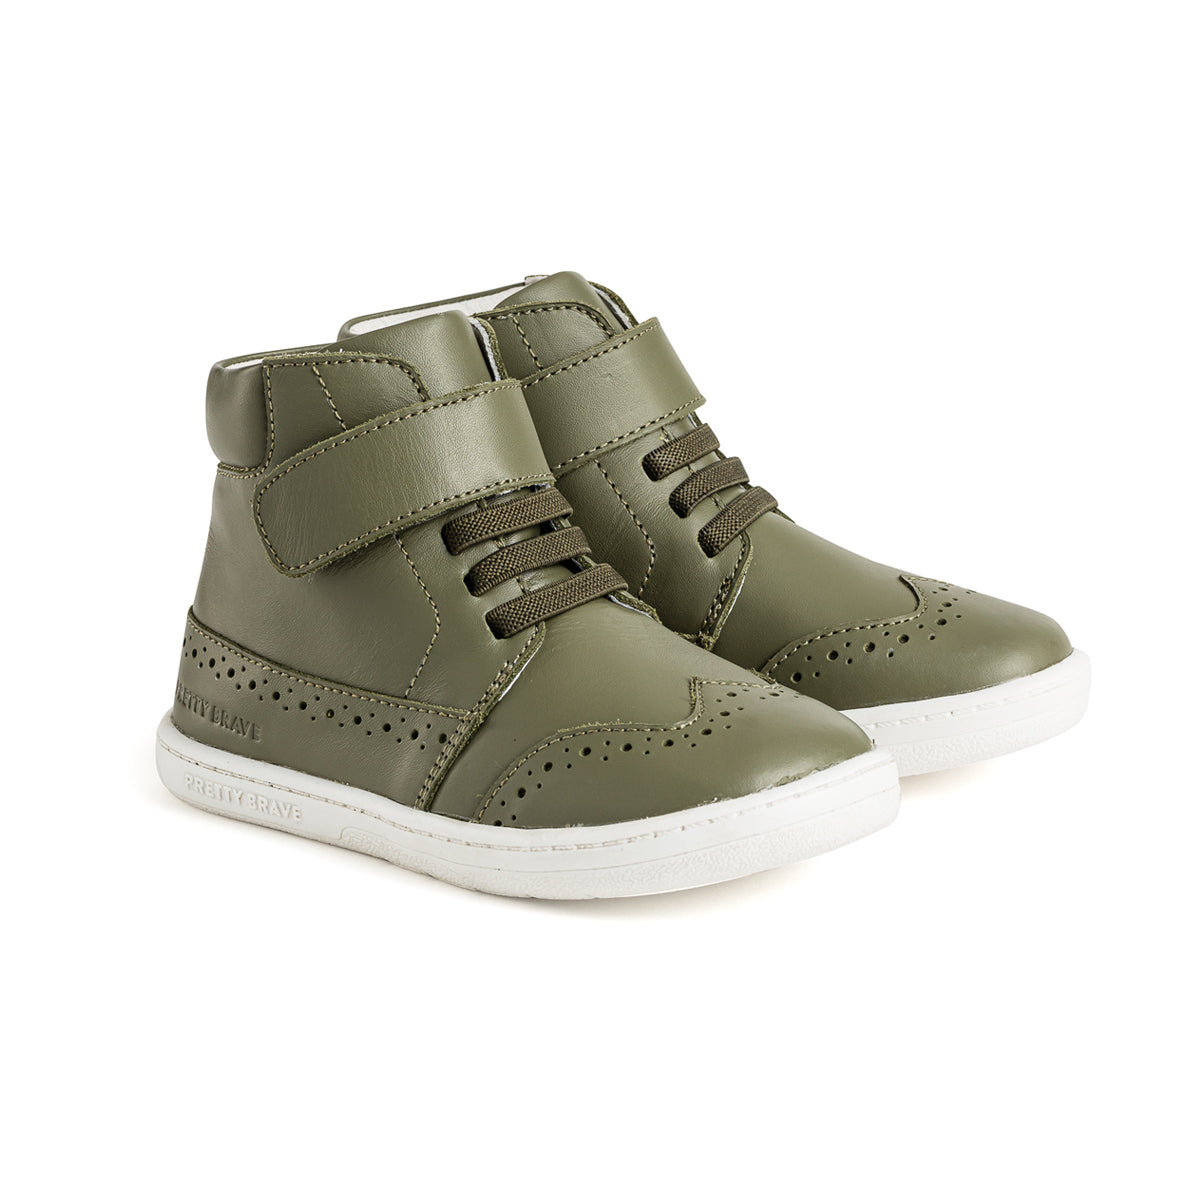 Pair of Harley ankle boot in colour olive